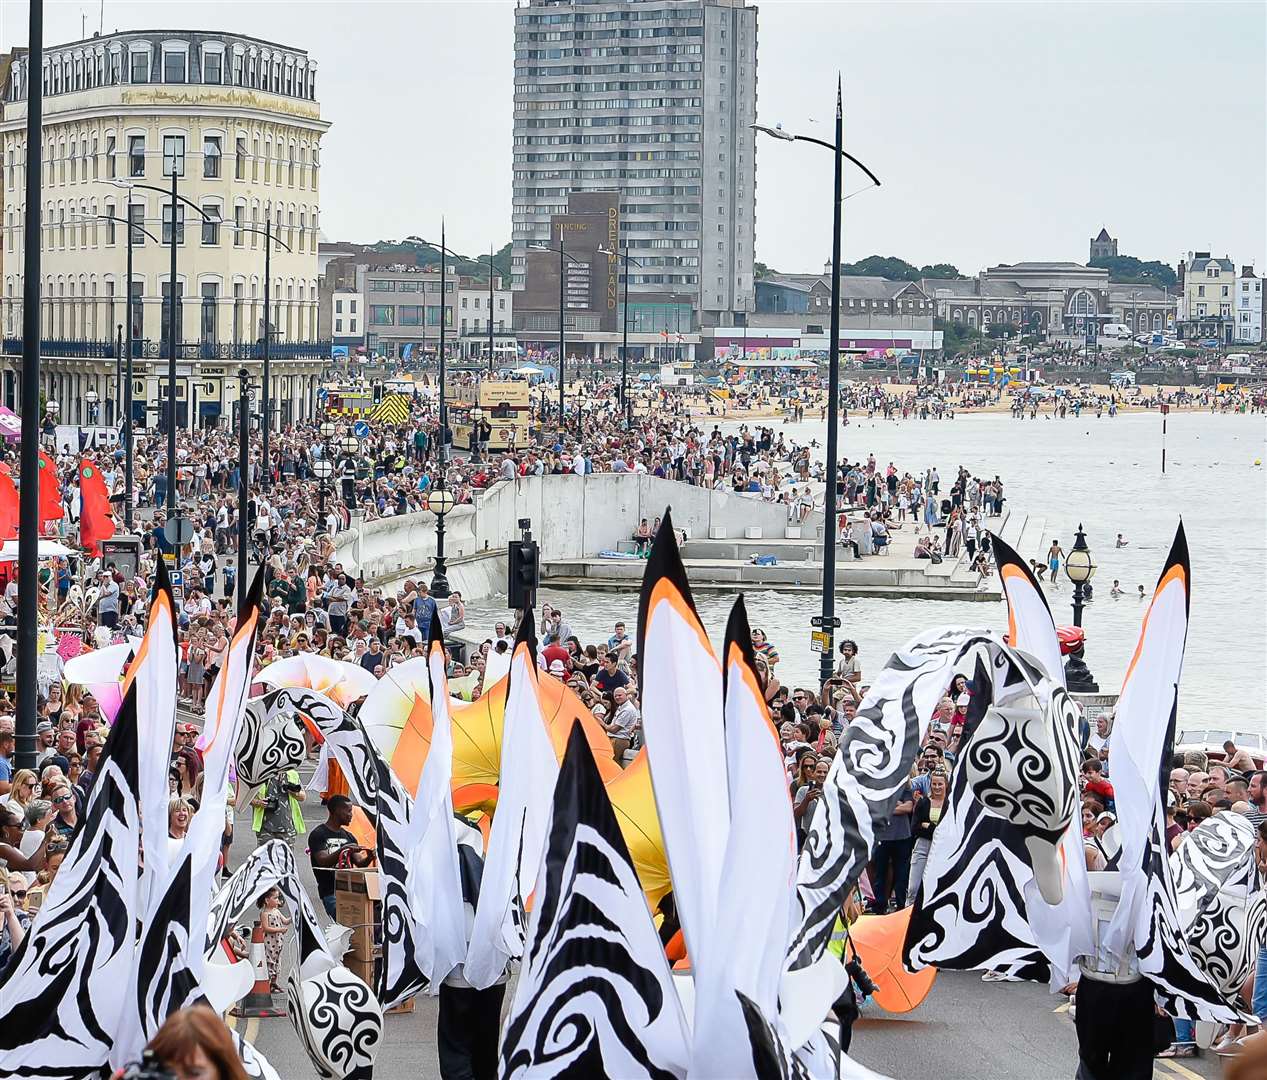 More than 20,000 spectators lined the streets of Margate for the carnival last year